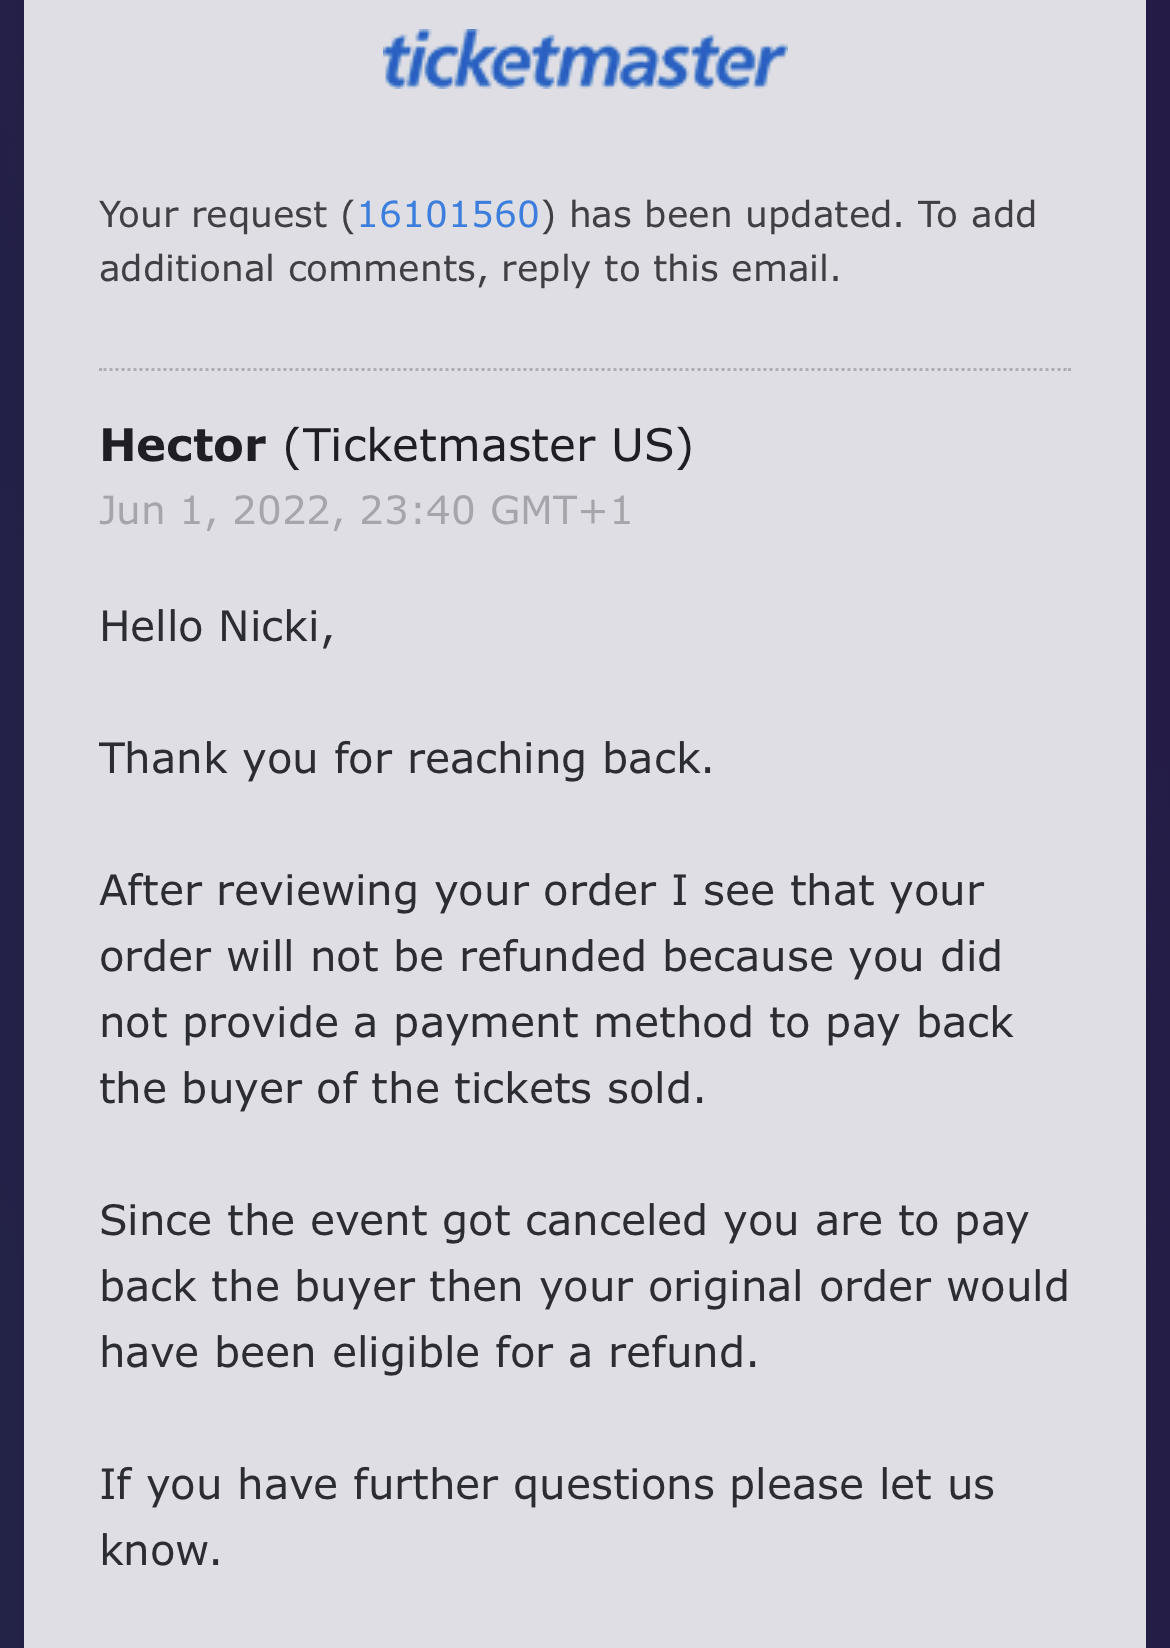 Ticketmaster complaint Ridiculous dealing with canceled event.